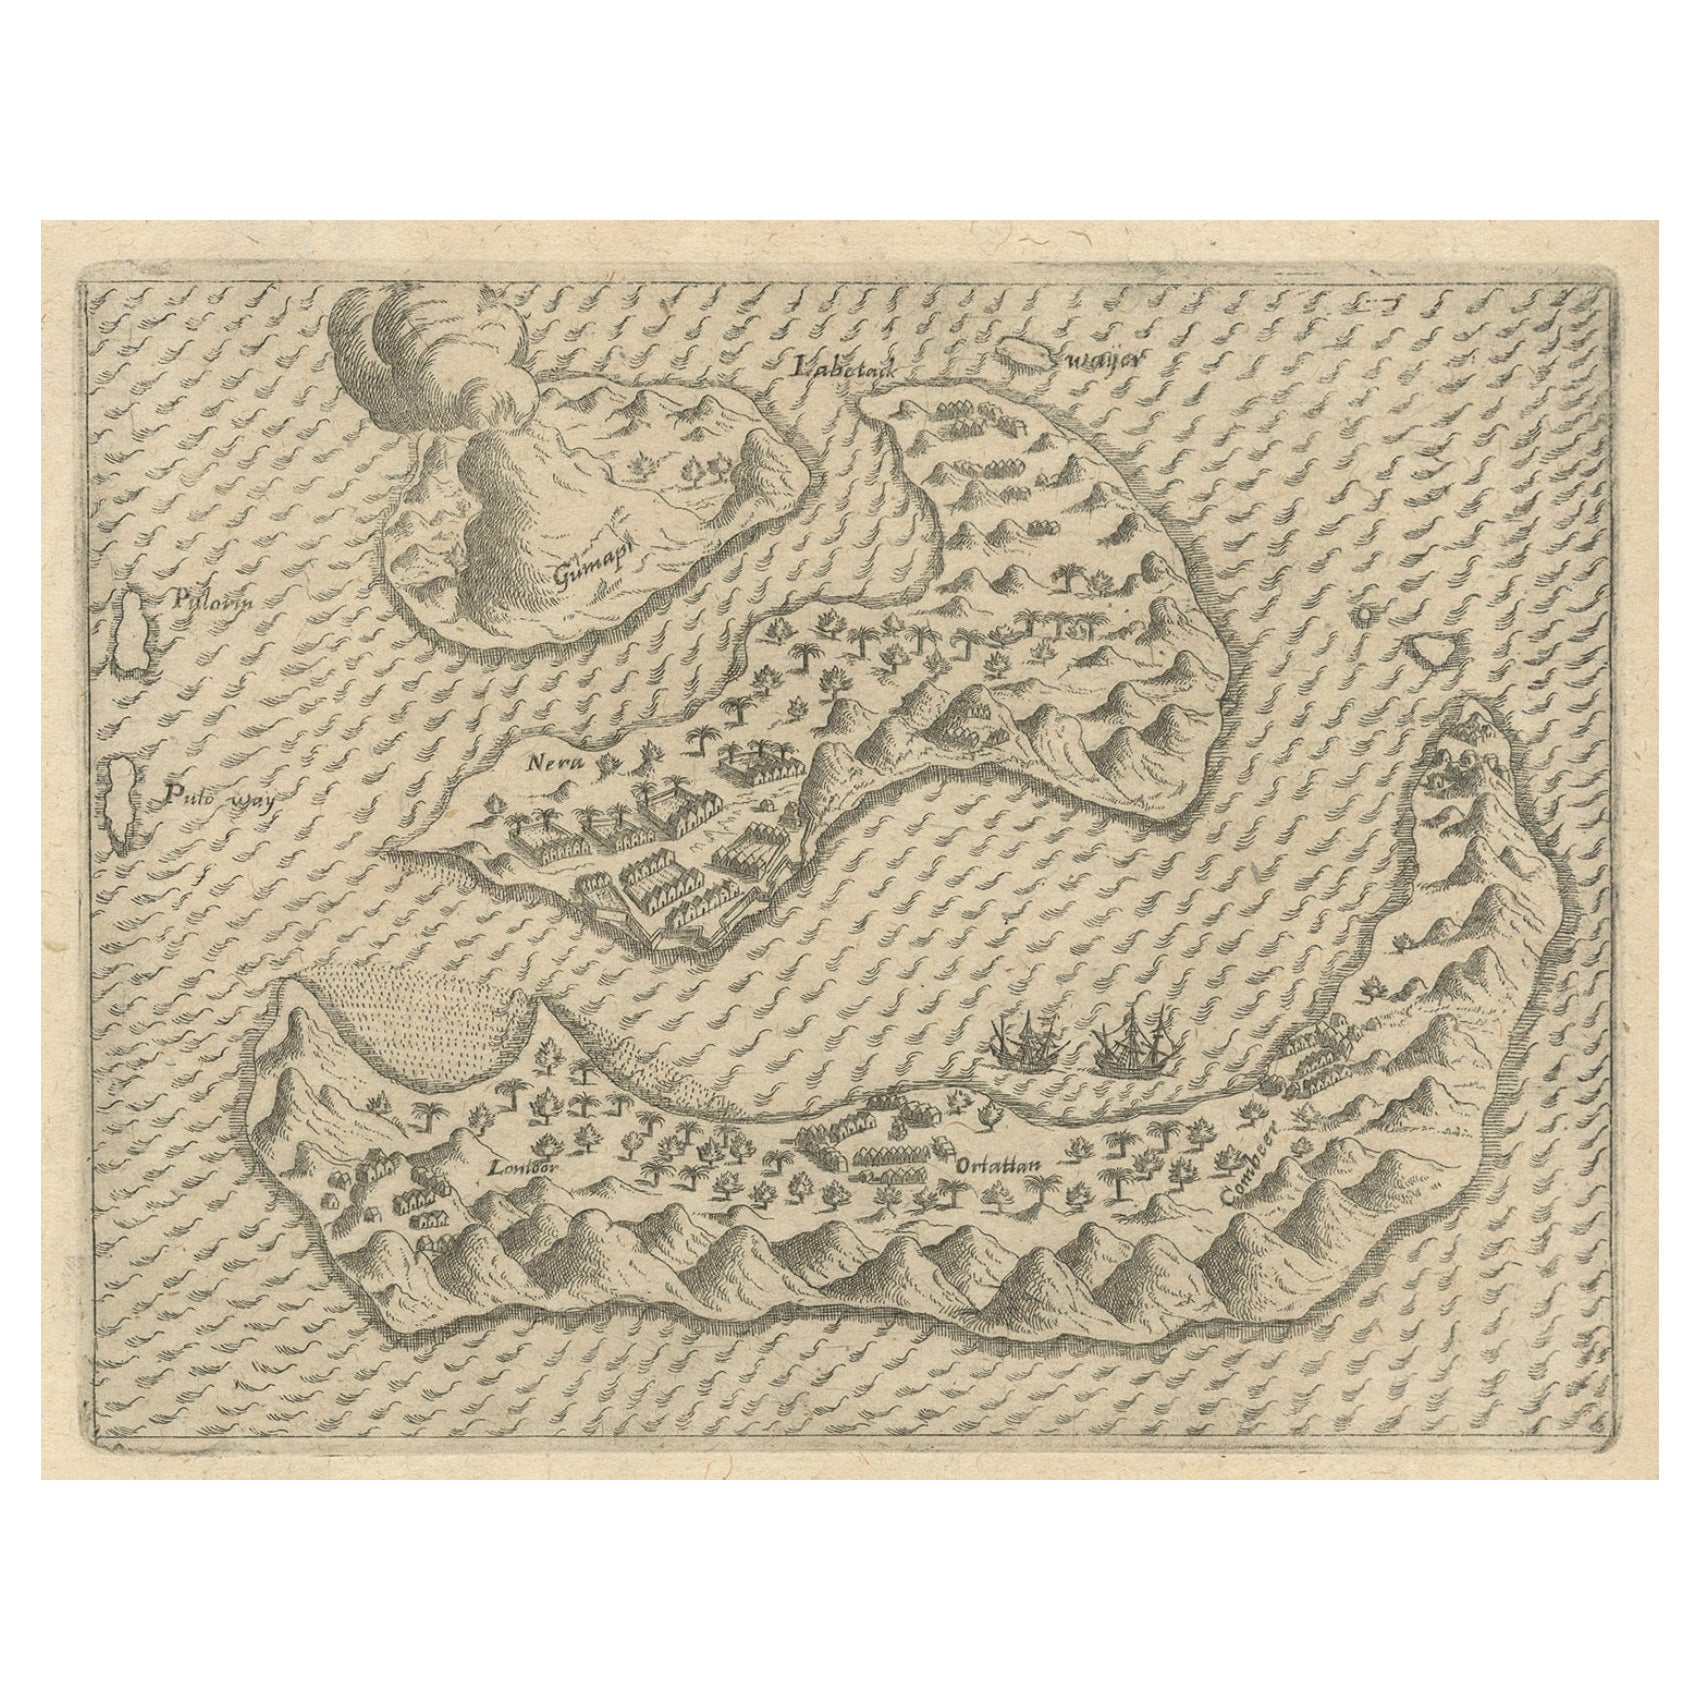 Rare Antique Pap Depicting the Banda Islands or Spice Islands, Indonesia, c.1600 For Sale